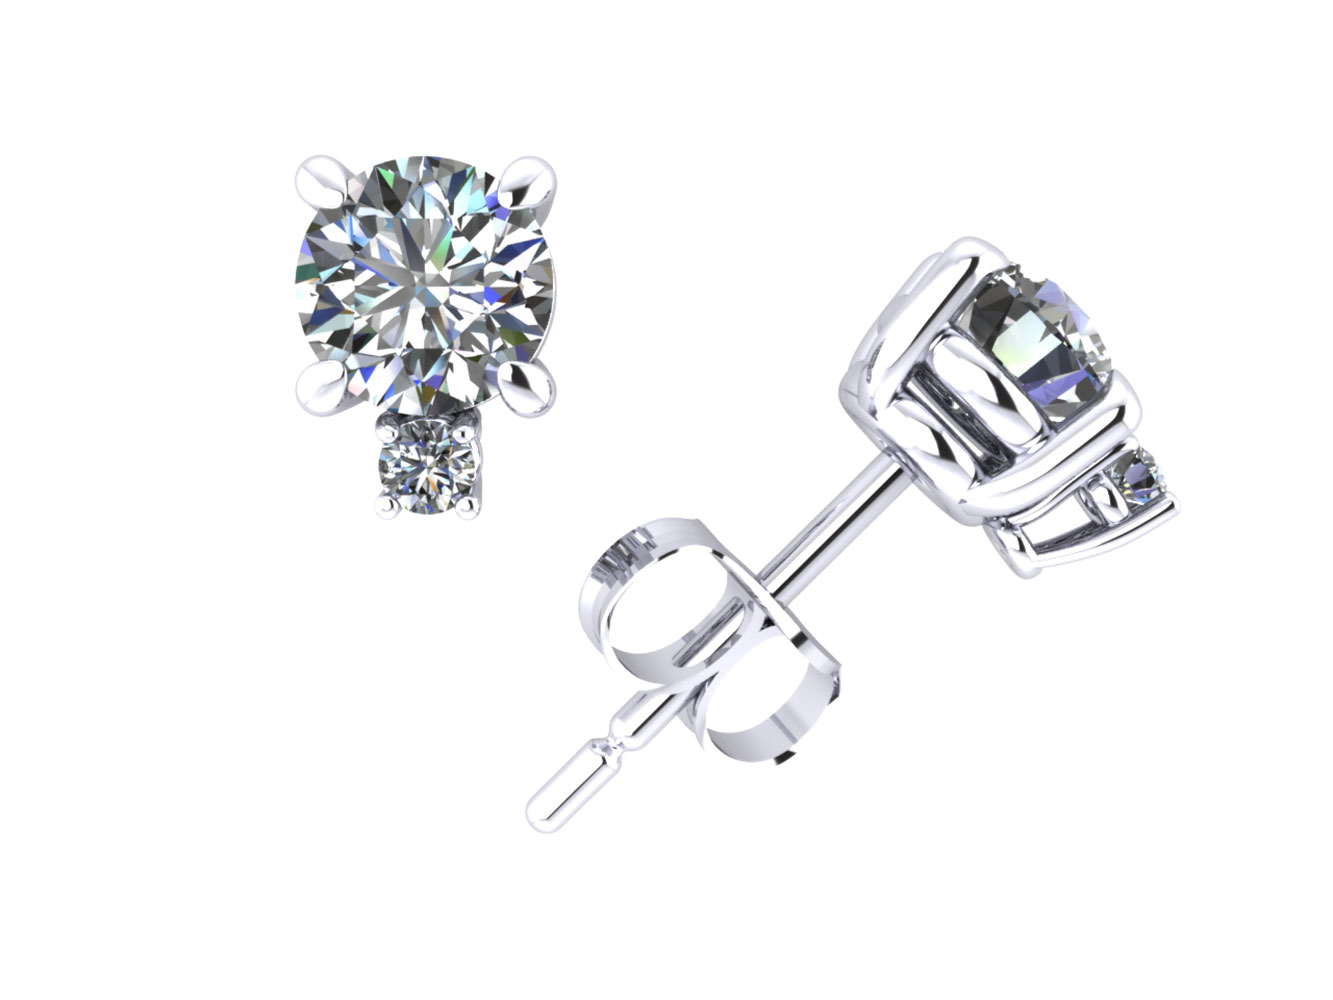 Jewel We Sell 1.03CT Round Diamond Stud Earrings with Accents 14k White or Yellow Gold Prong Set G SI1